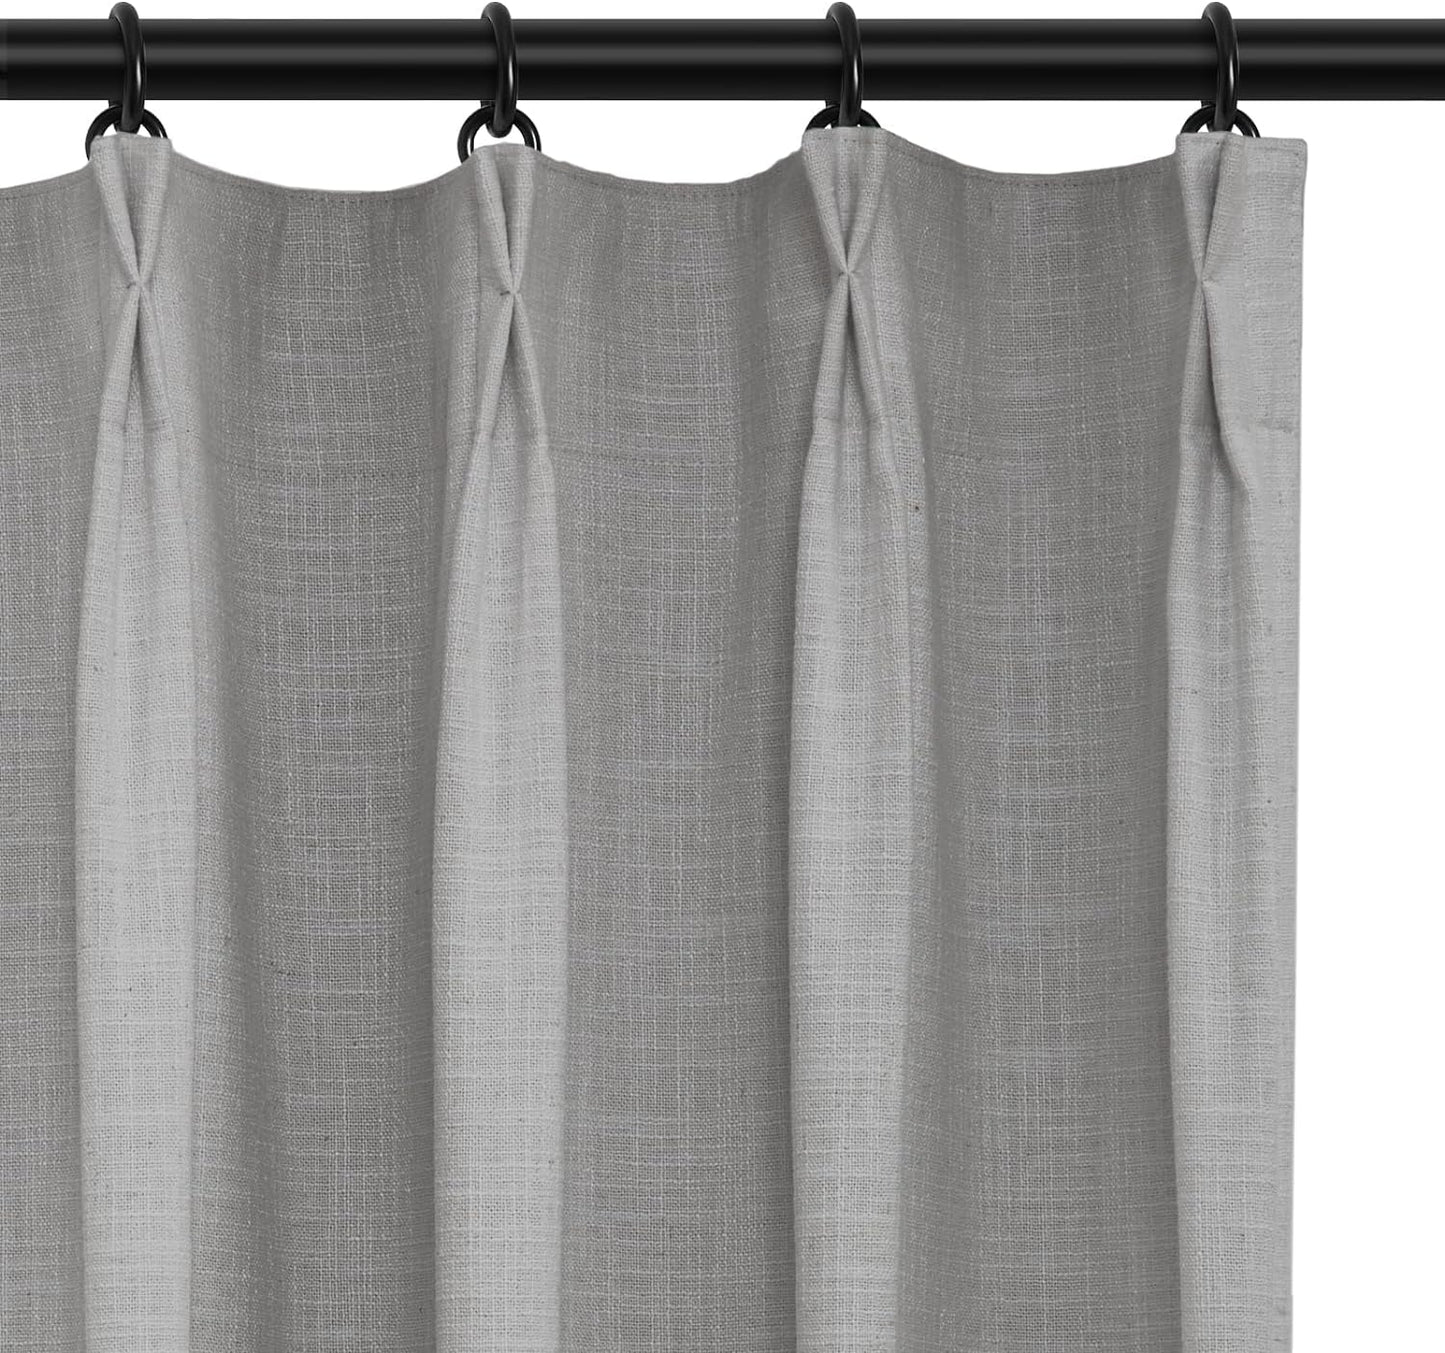 INOVADAY 100% Blackout Curtains for Bedroom, Pinch Pleated Linen Blackout Curtains 96 Inch Length 2 Panels Set, Thermal Room Darkening Linen Curtain Drapes for Living Room, W40 X L96,Beige White  INOVADAY Flagstone 40"W X 84"L-2 Panels 